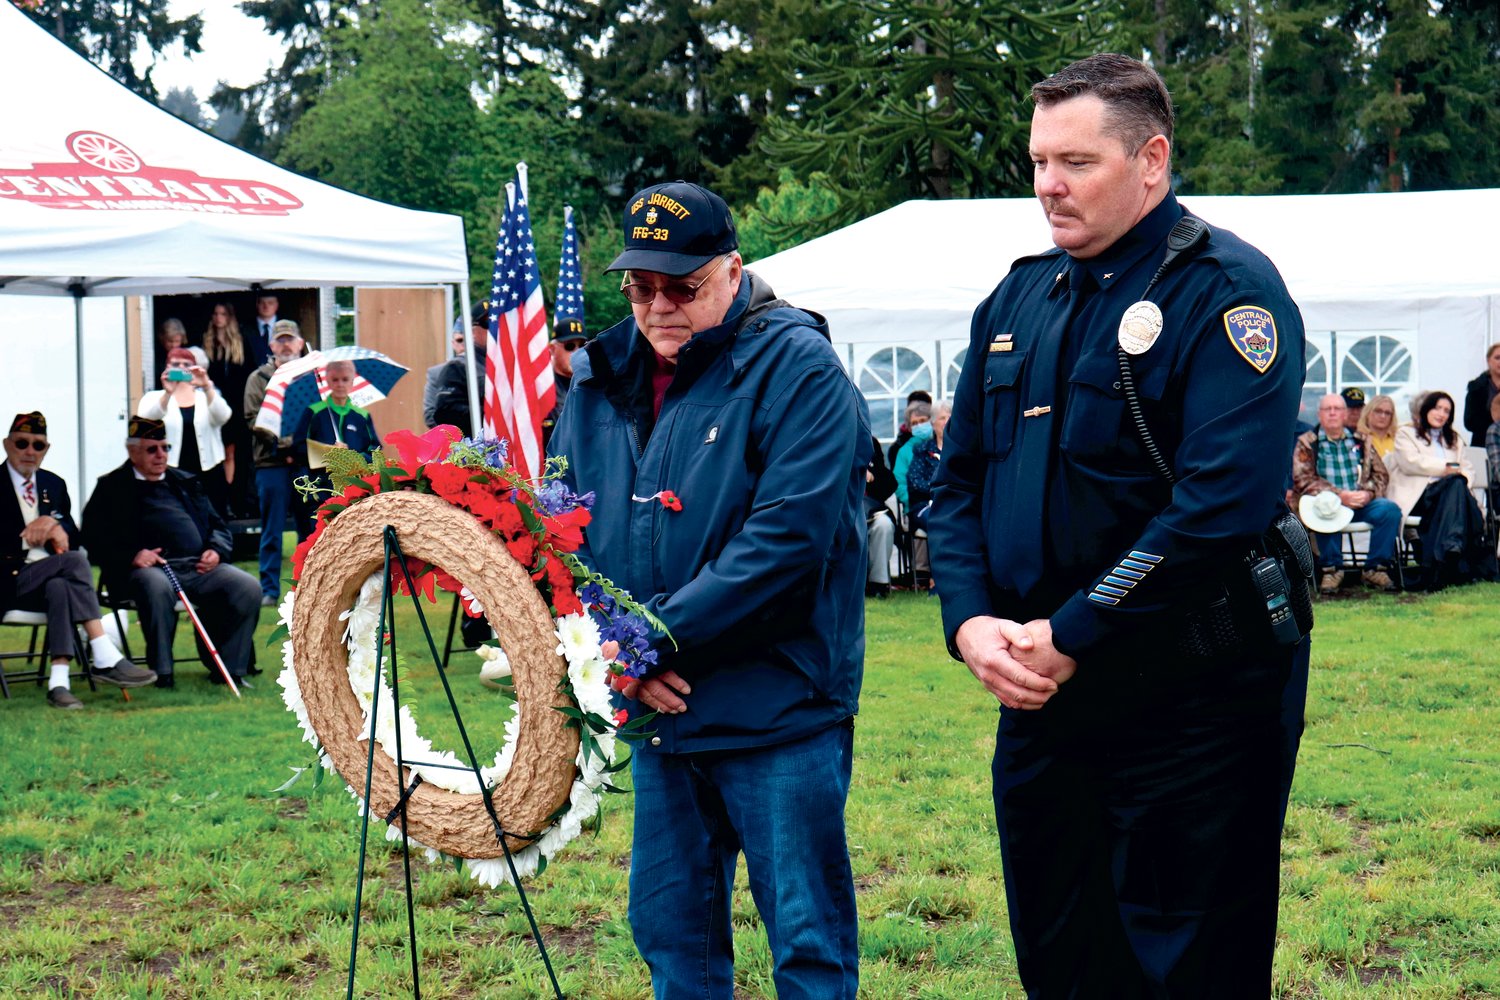 Pat Althauser, left, and Centralia Police Commander Andy Caldwell place a memorial wreath at Sticklin Greenwood Memorial Park during a rededication ceremony on Saturday.